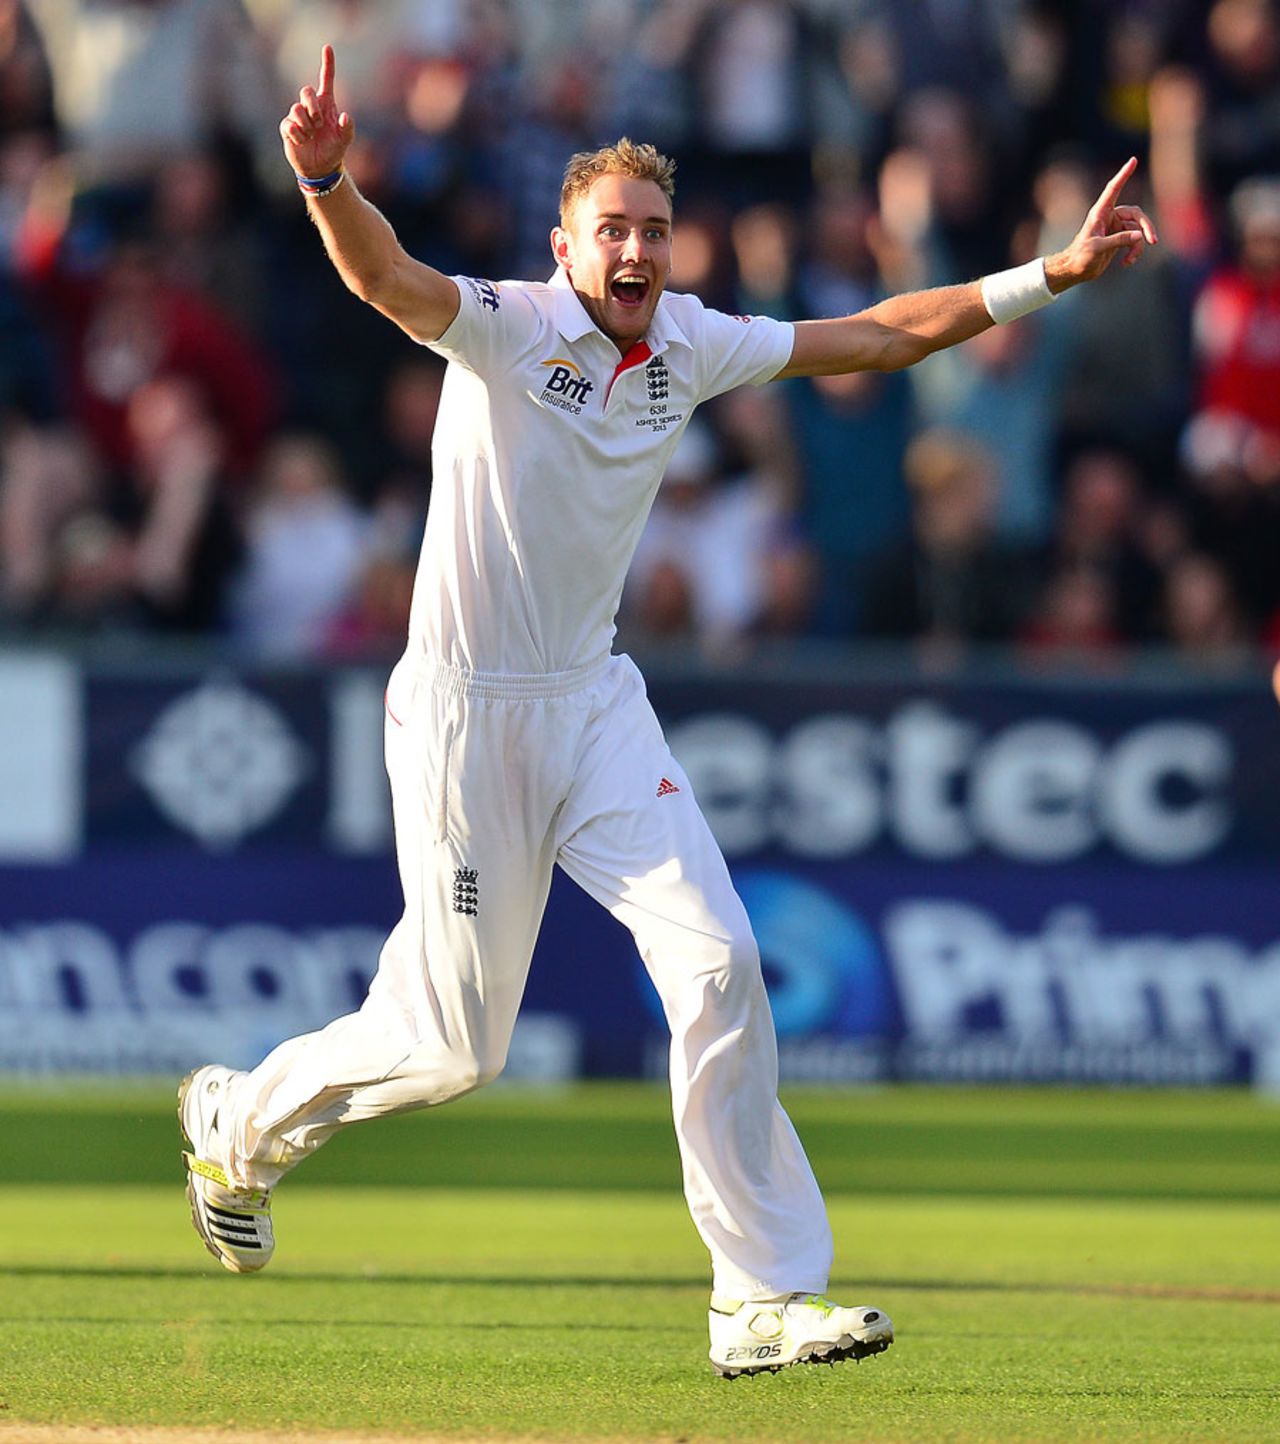 Stuart Broad beams with delight as he takes the final wicket, England v Australia, 4th Investec Test, 4th day, Chester-le-Street, August 12, 2013